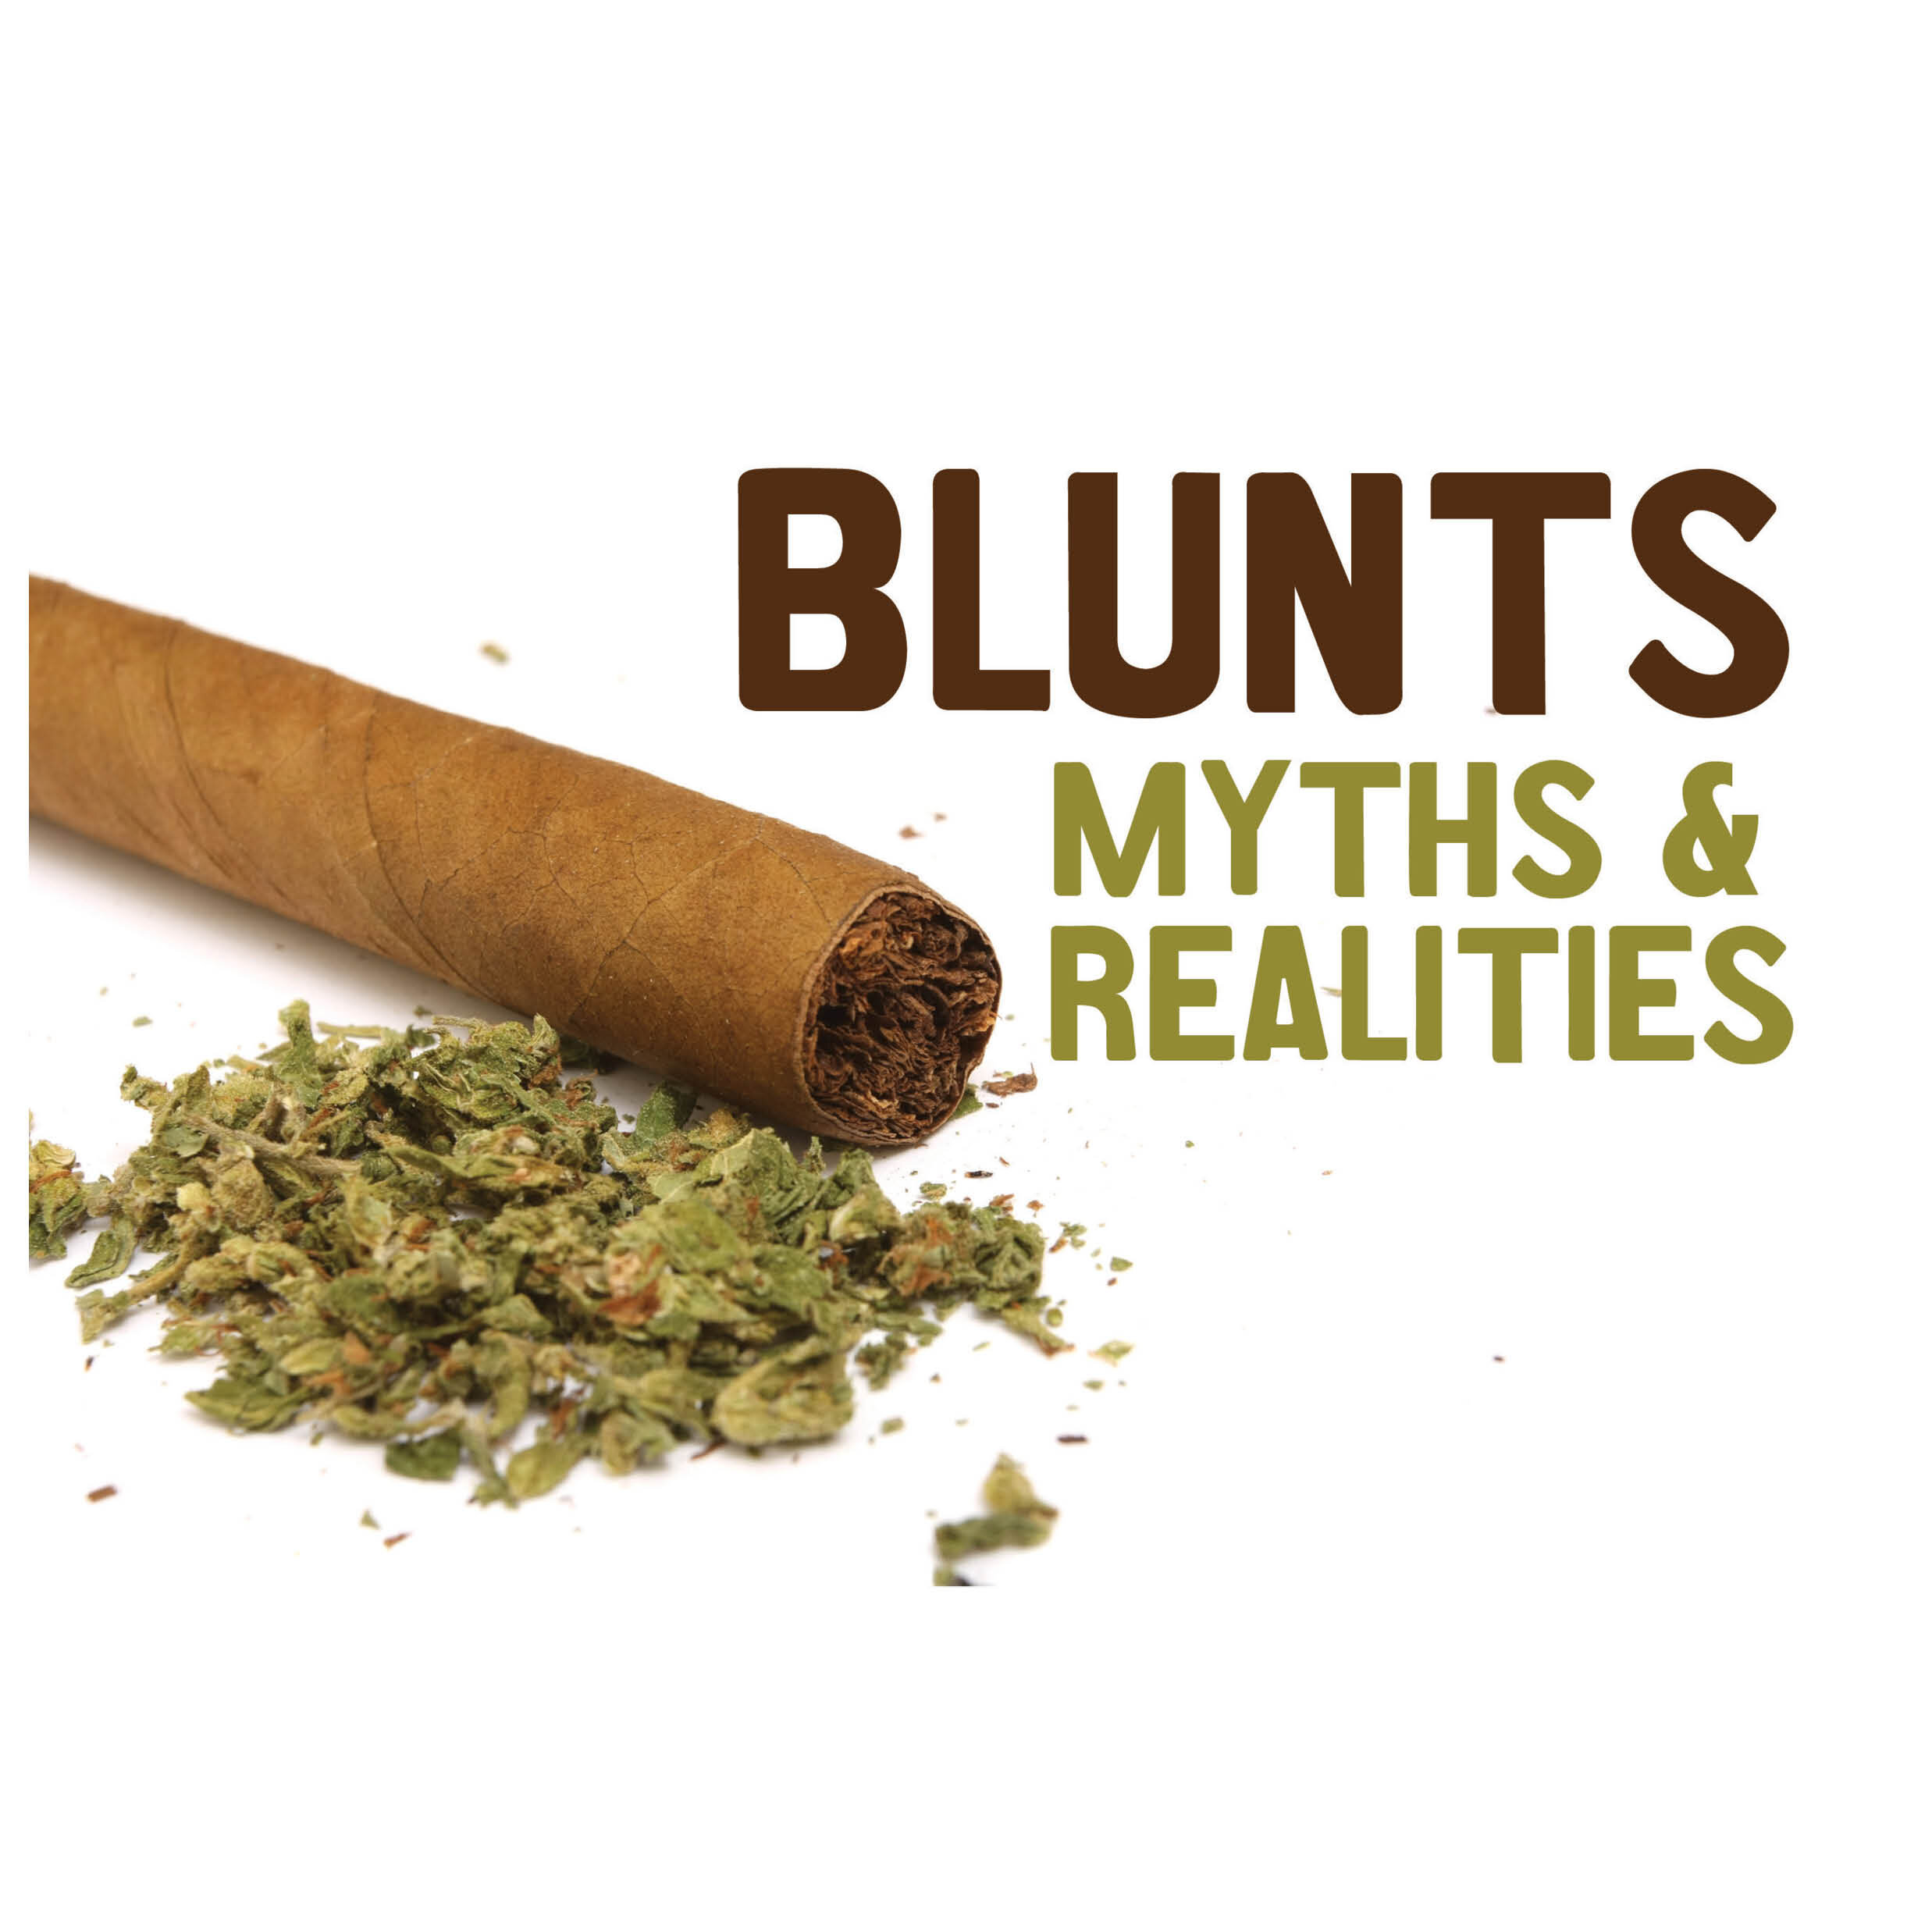 Blunts - Myths and Realities